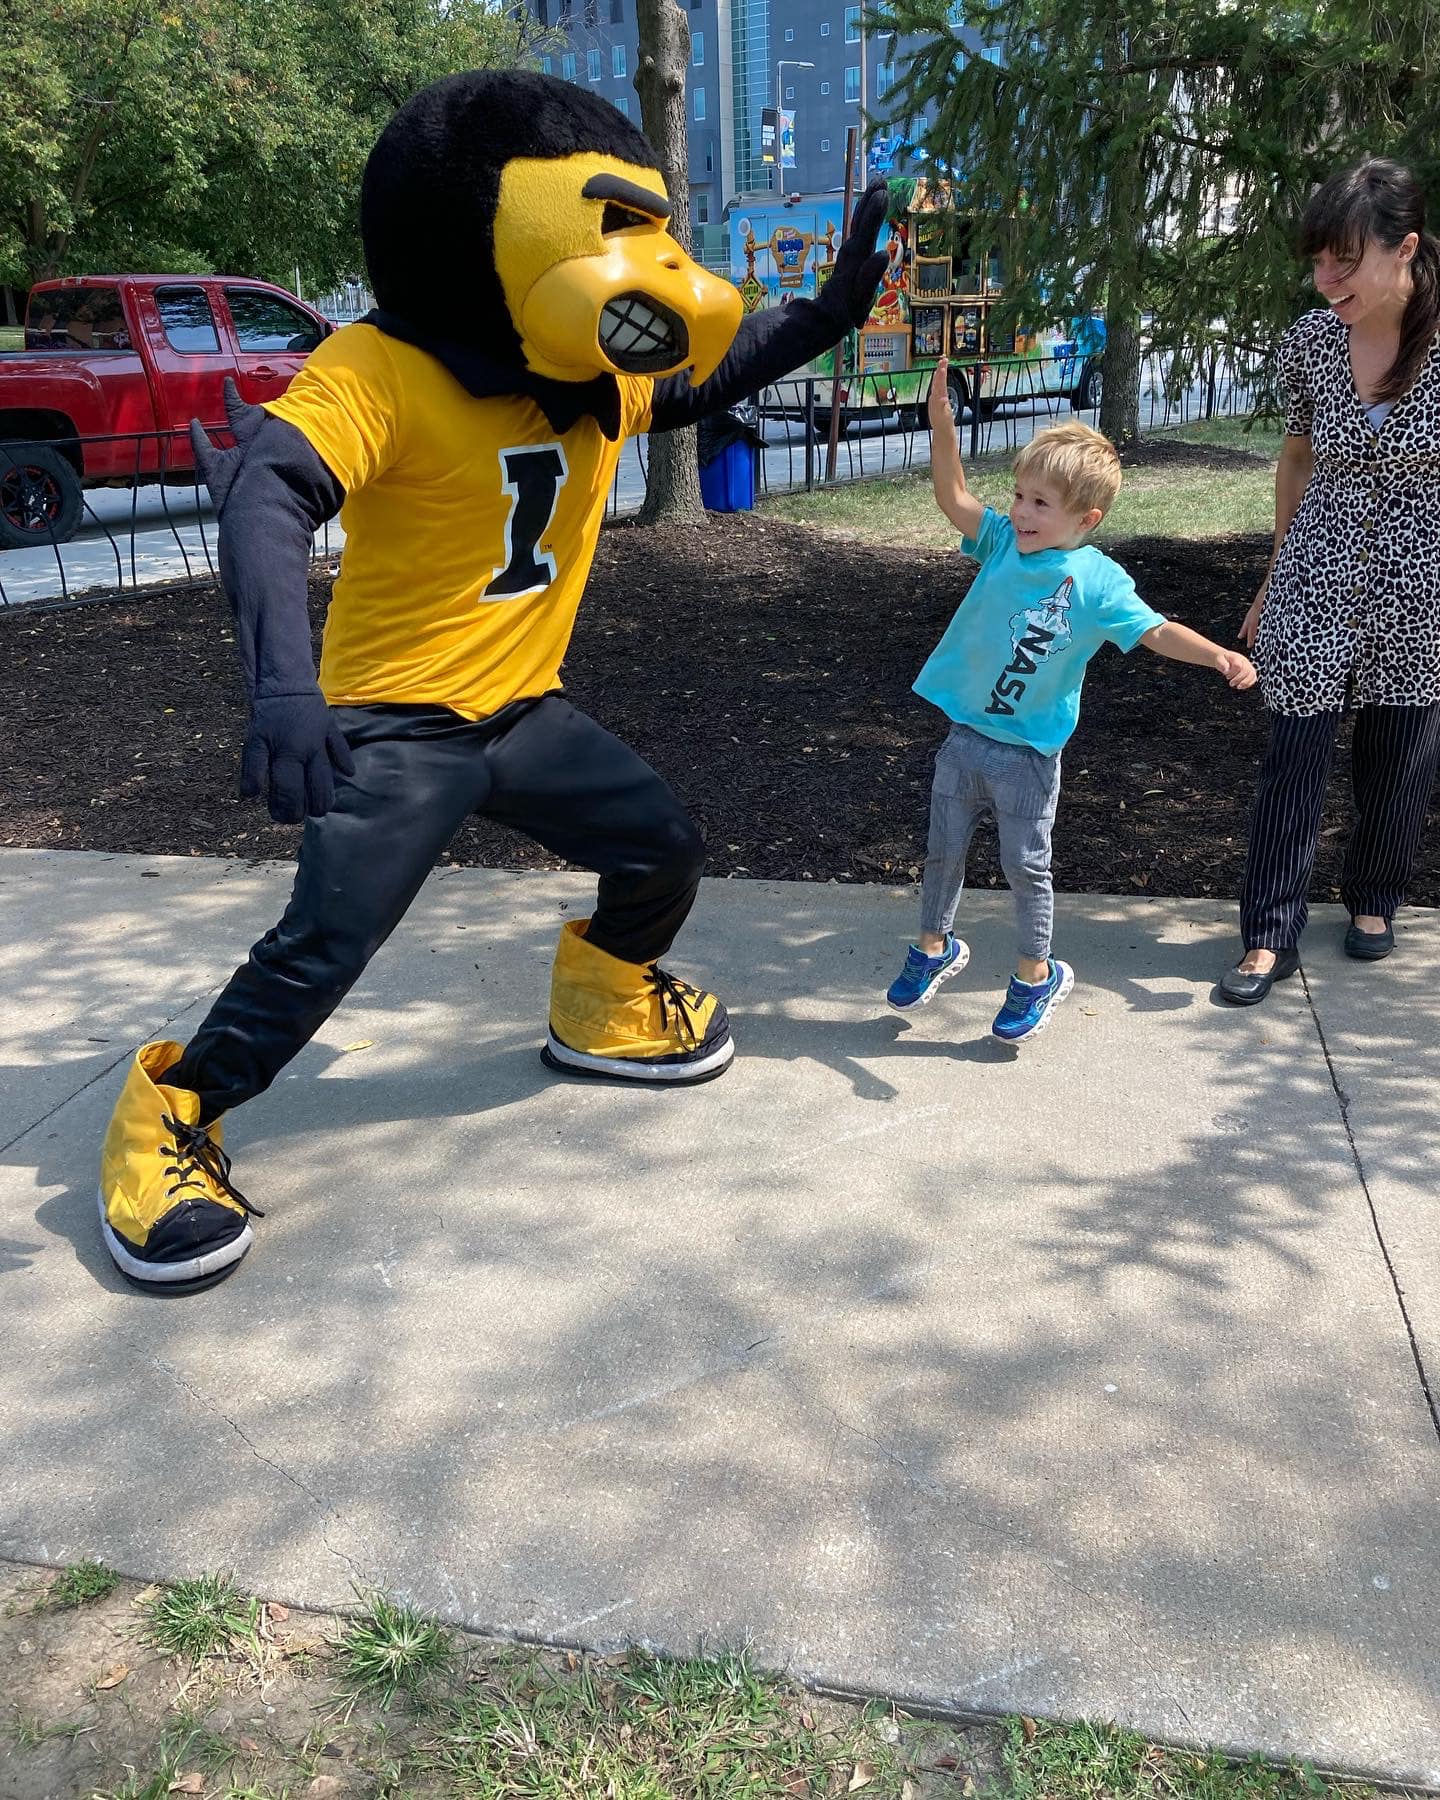 A small boy in a light blue shirt jumps in the air to give University of Iowa mascot Herky a high five.